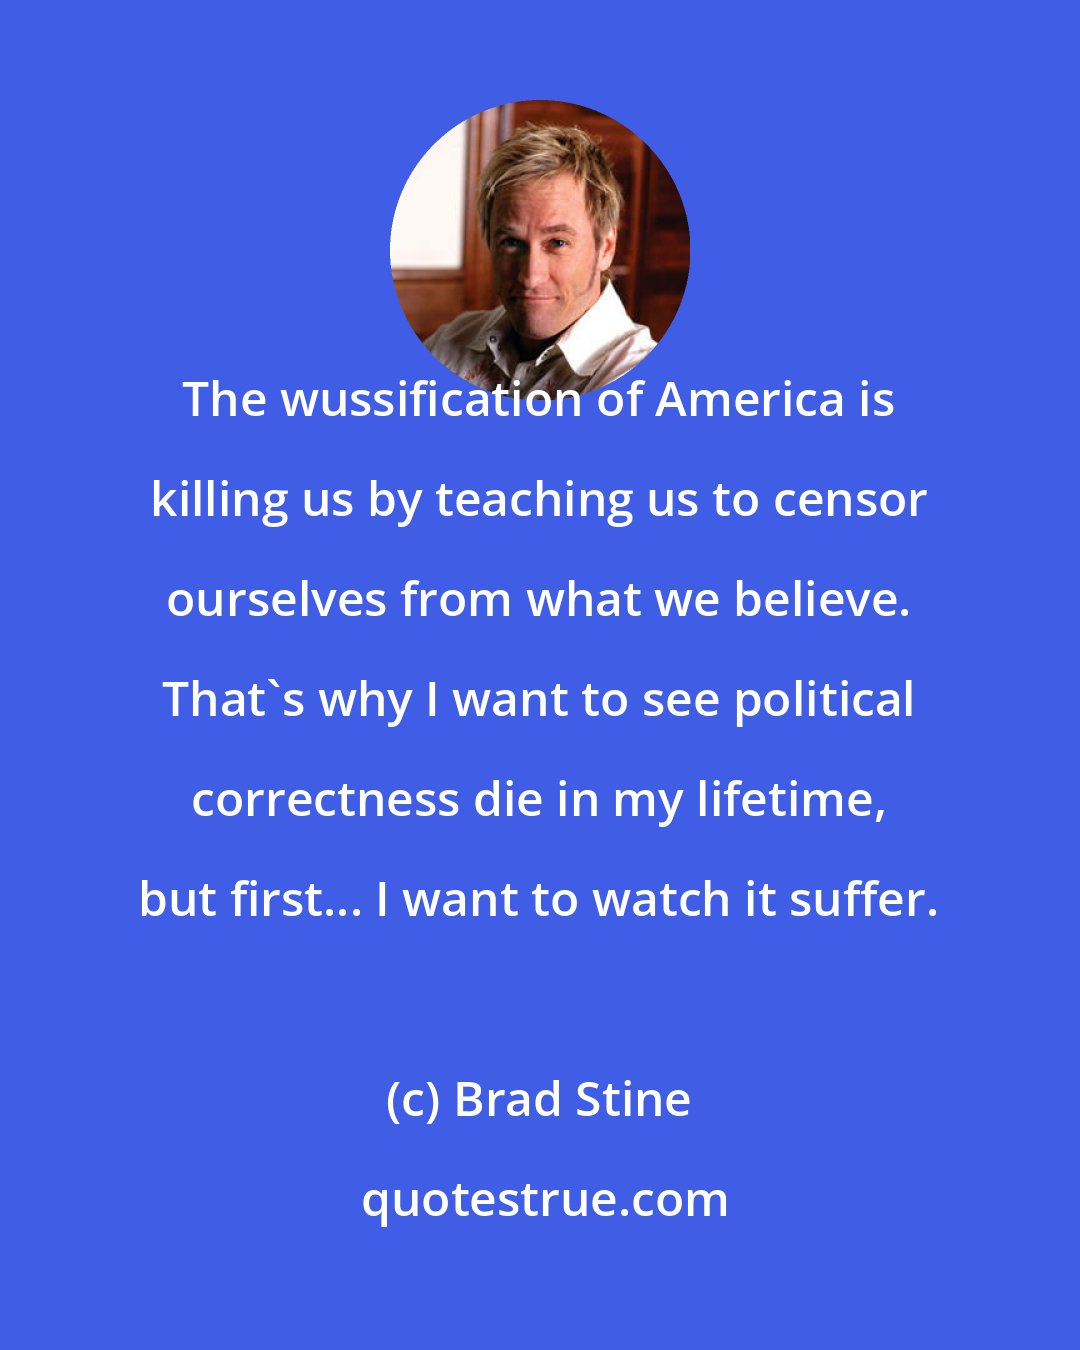 Brad Stine: The wussification of America is killing us by teaching us to censor ourselves from what we believe. That's why I want to see political correctness die in my lifetime, but first... I want to watch it suffer.